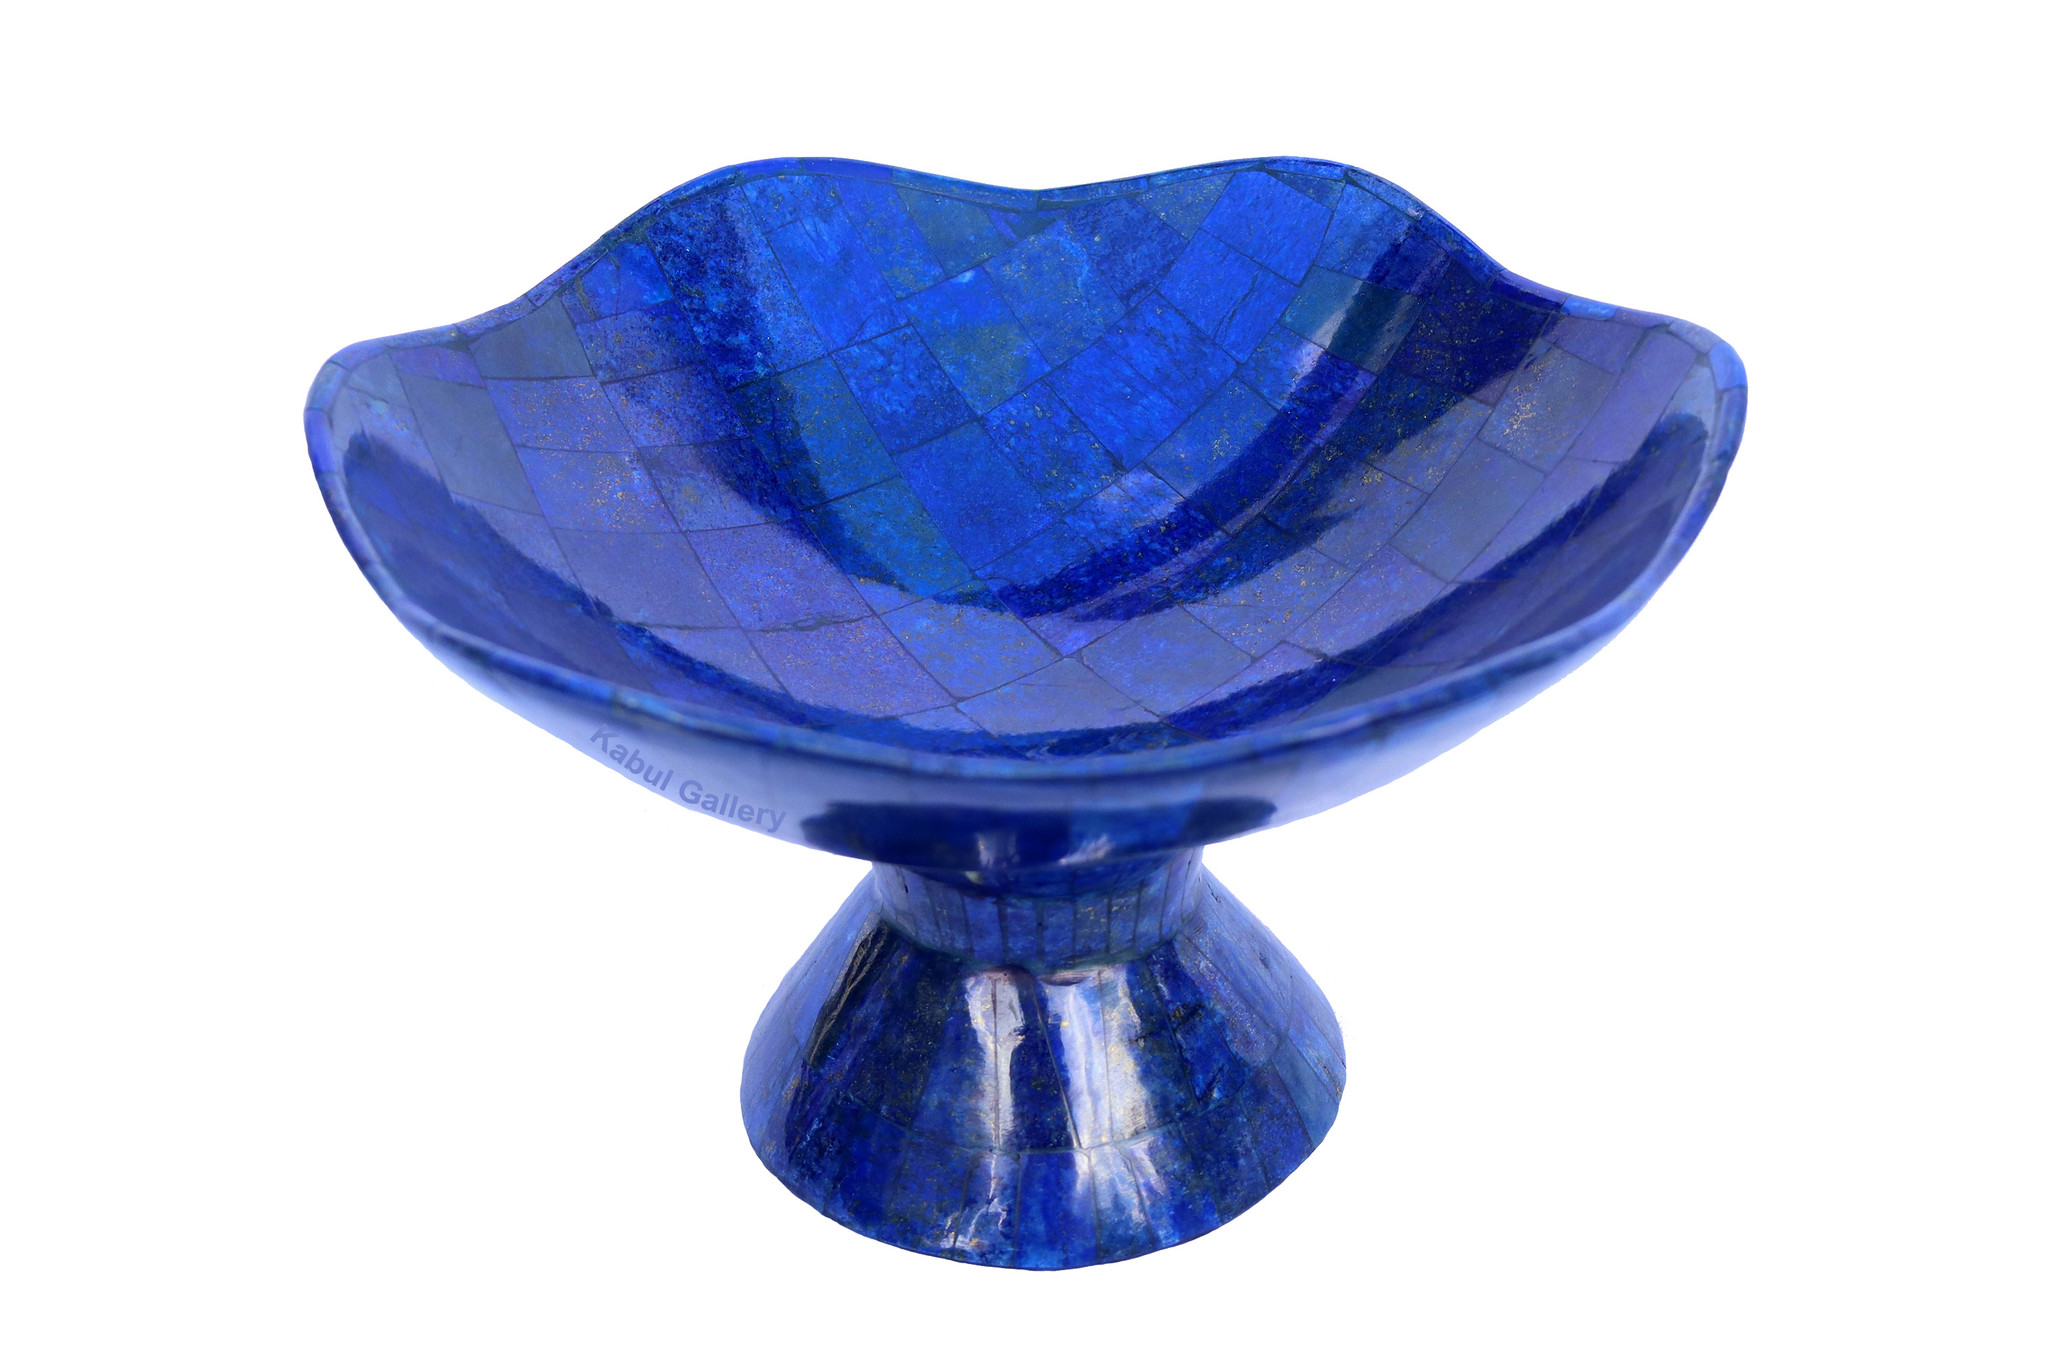 26 cm diameter Hand Crafted  Lapis Lazuli Gemstone fruit Bowl withe feet from Afghanistan  M/23